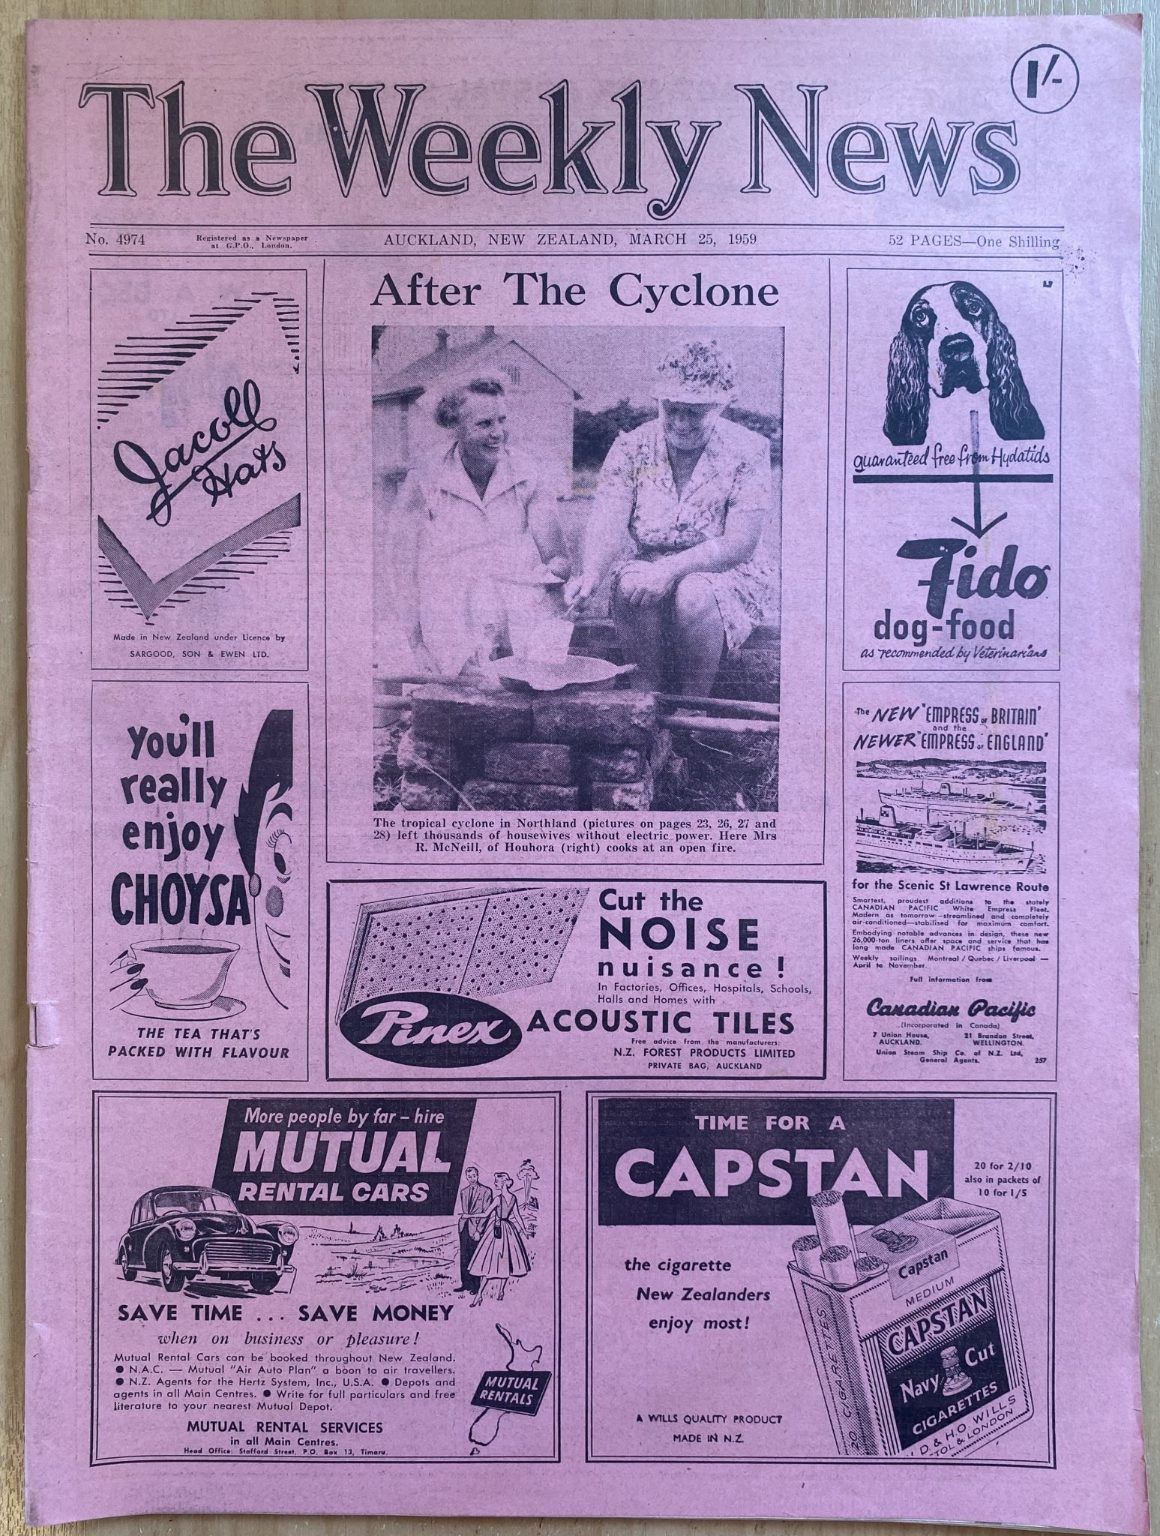 OLD NEWSPAPER: The Weekly News - No. 4974, 25 March 1959